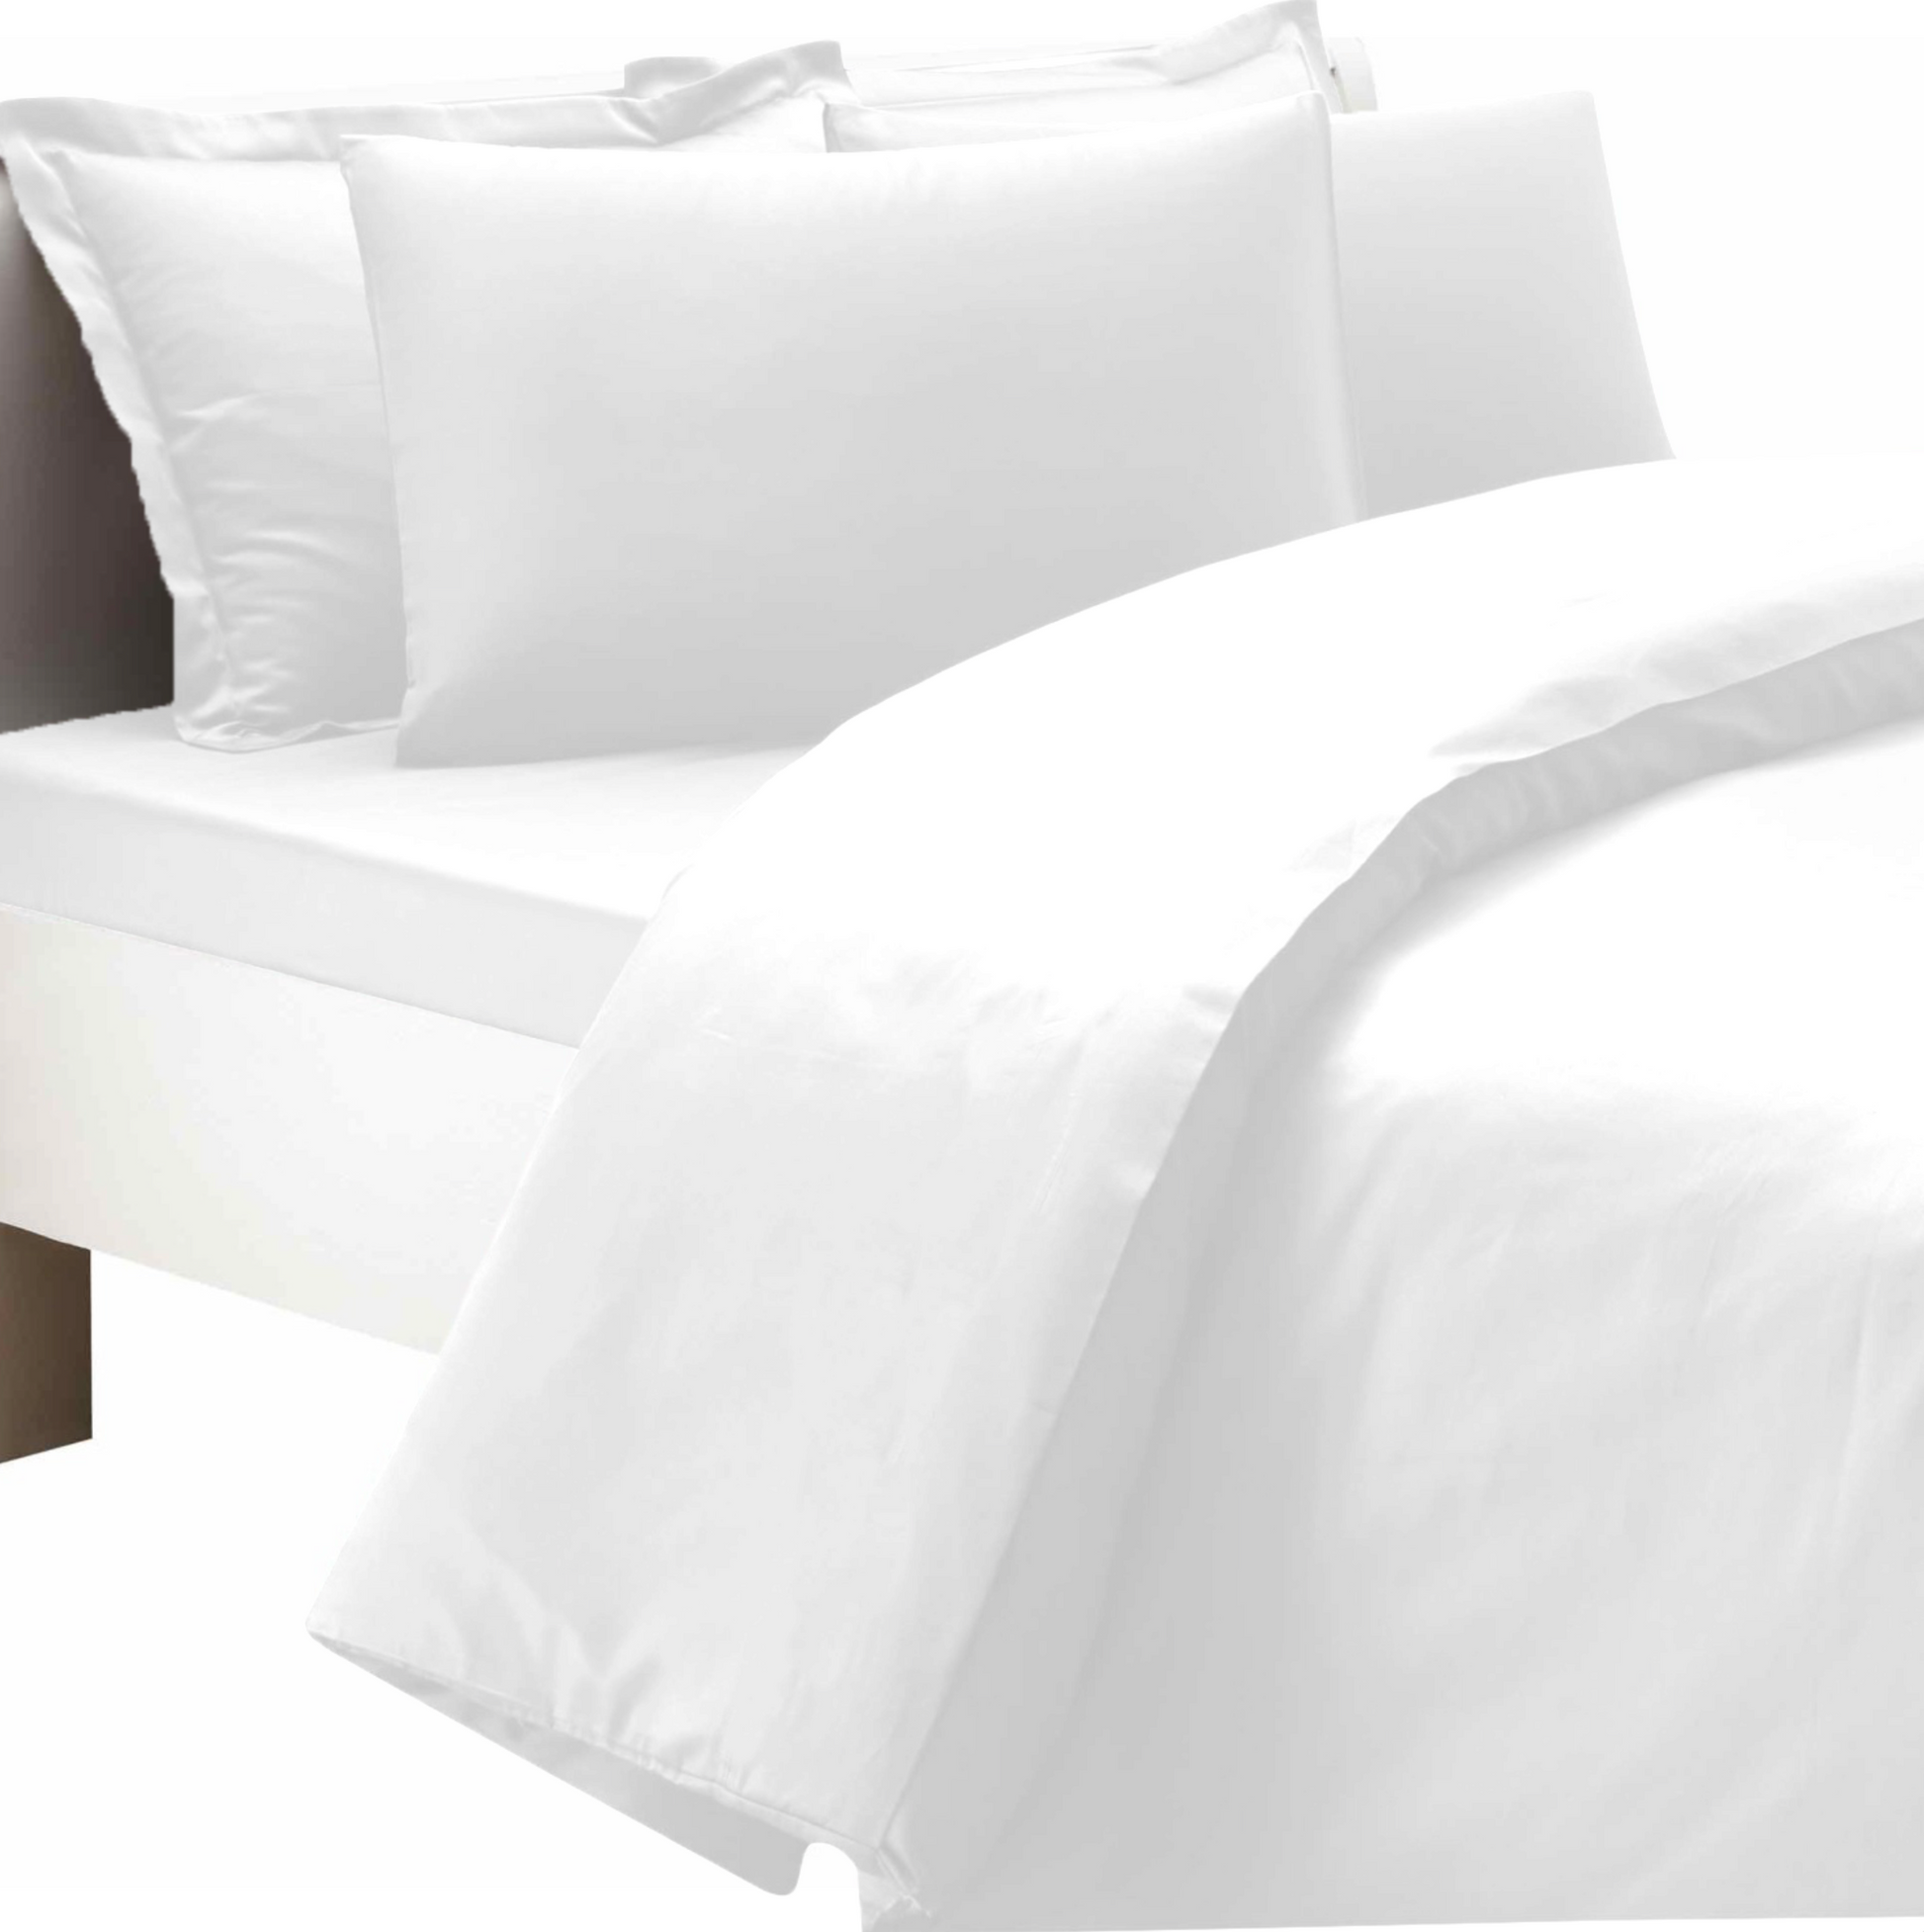 White bedding set made of natural 100% cotton of the highest quality of high density. Comfortable, soft, durable. Elfstorenz.